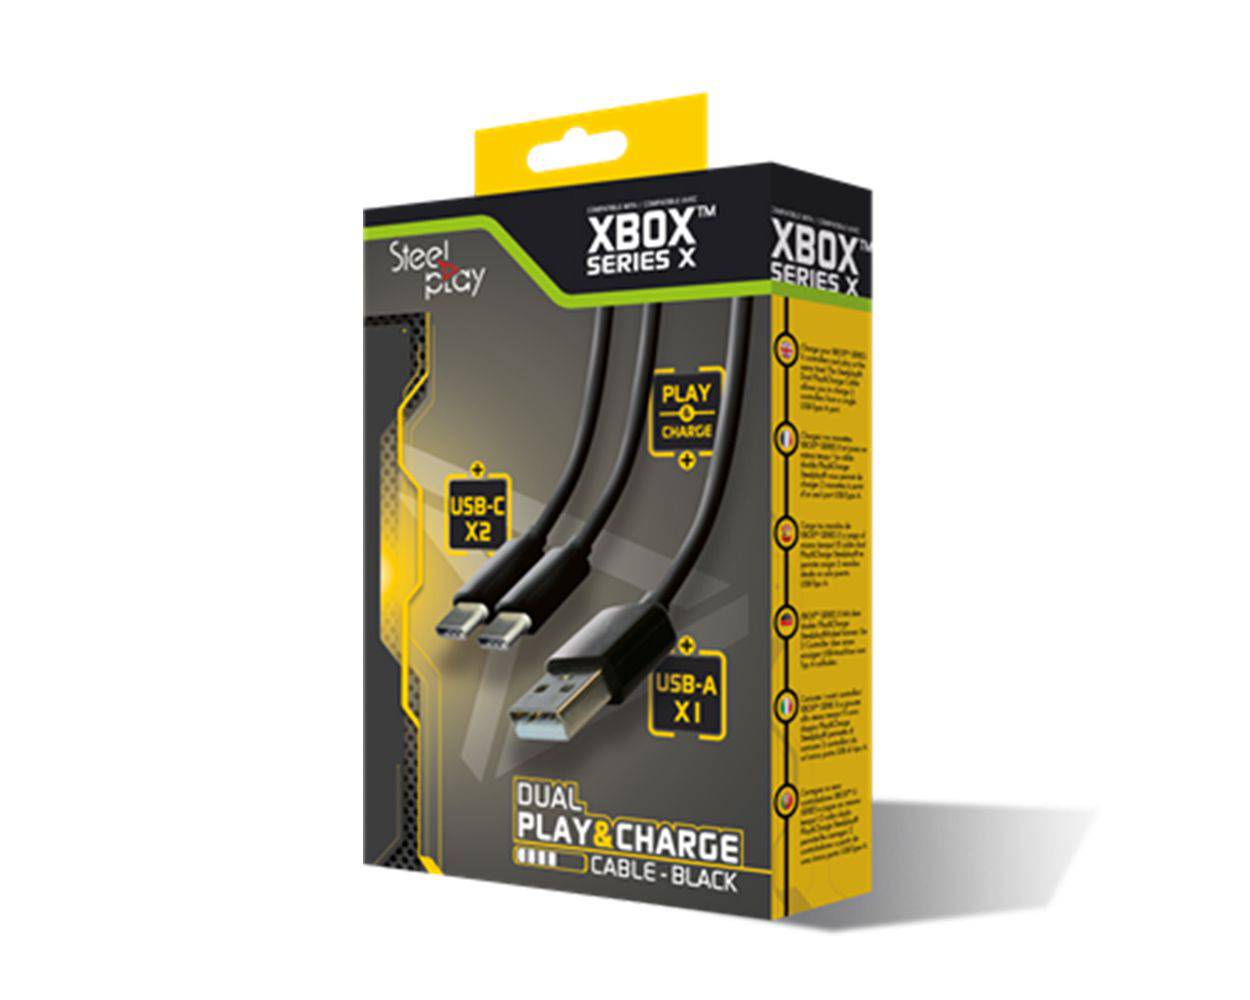 Cable Steelplay Dual Play & Charge Xbox Series X Black - Albagame